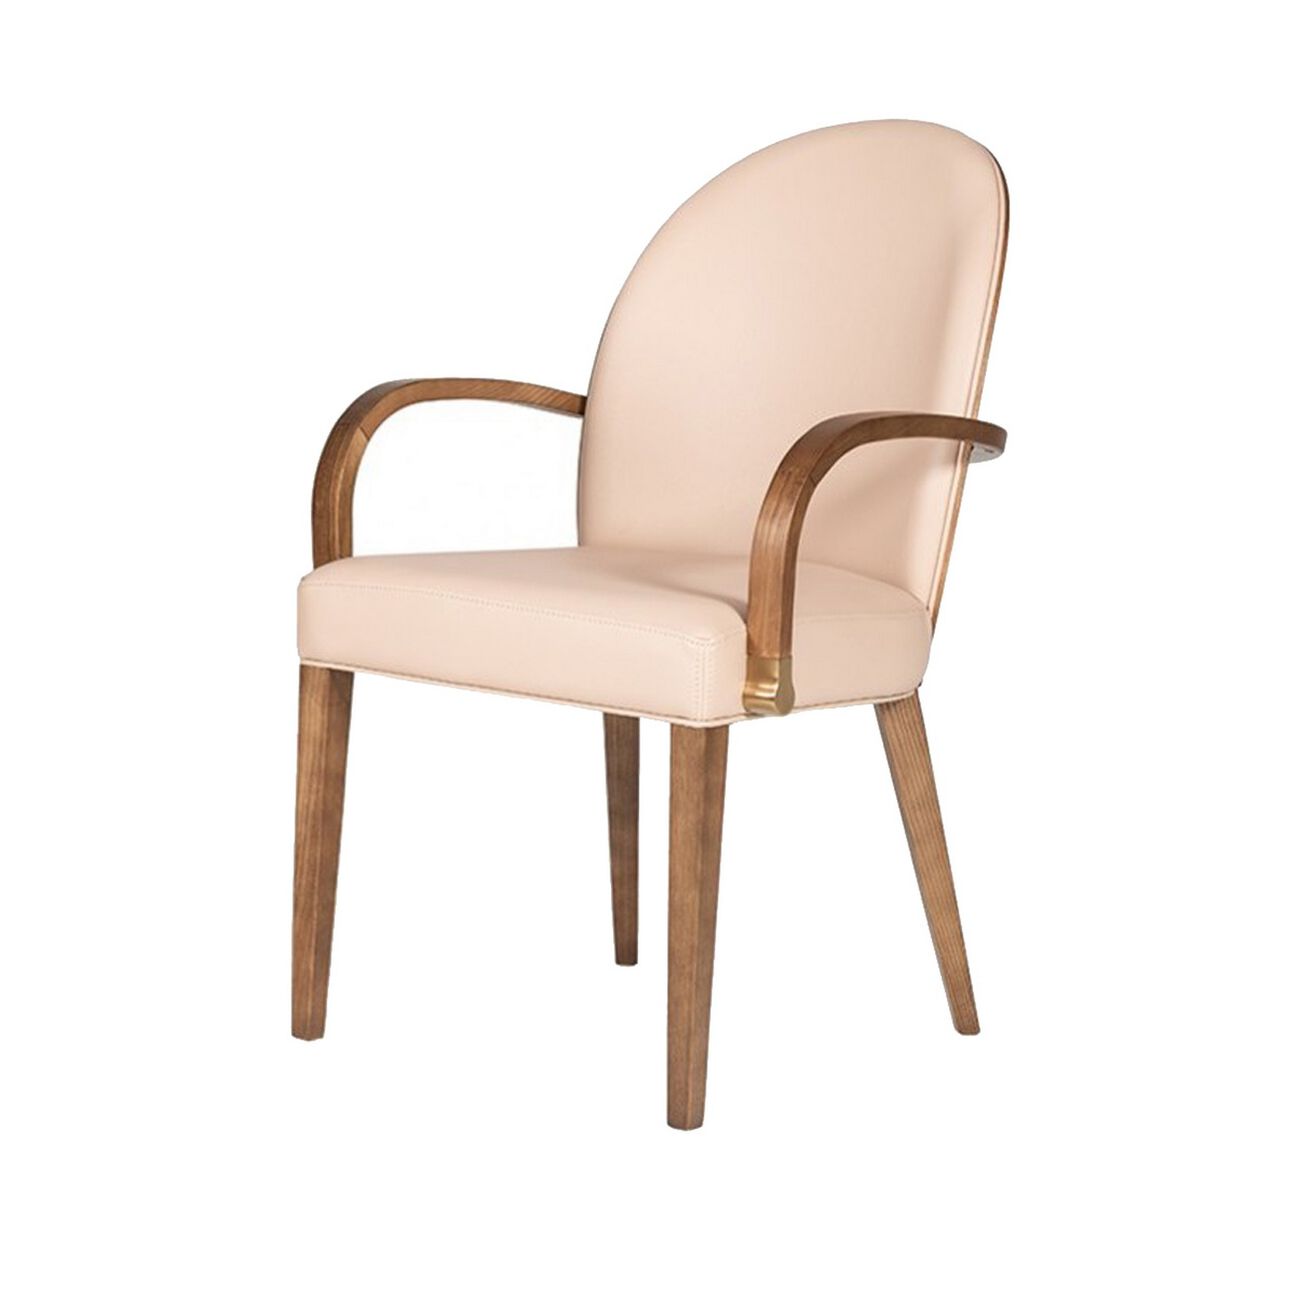 Leatherette Arched Dining Chair with Round Tapered Legs, Brown and Beige